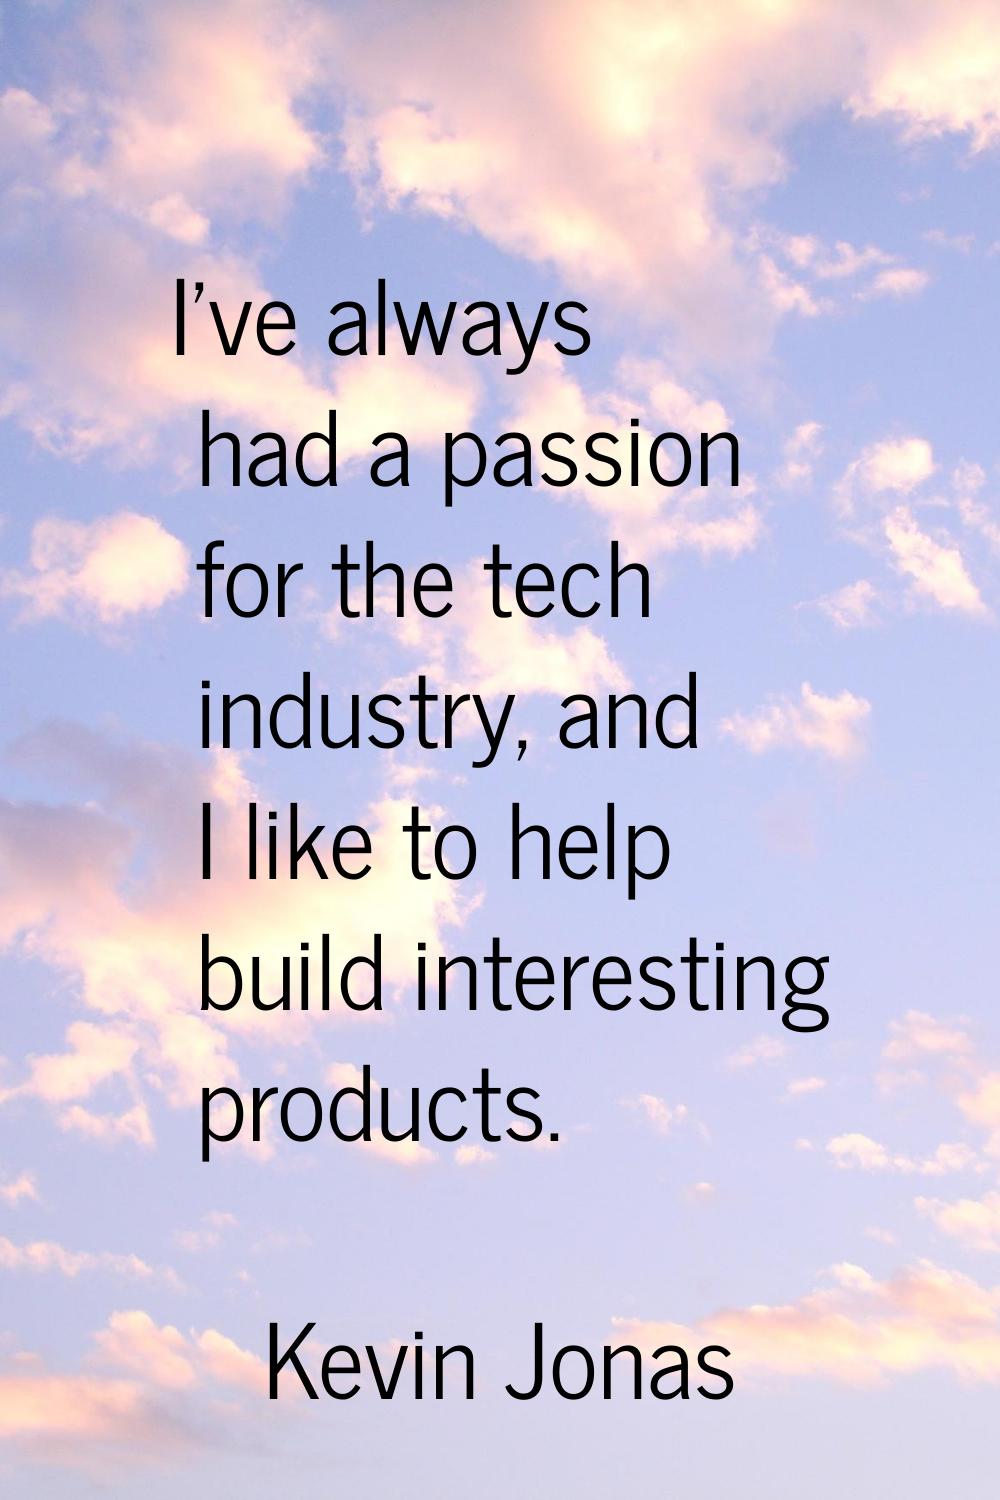 I've always had a passion for the tech industry, and I like to help build interesting products.